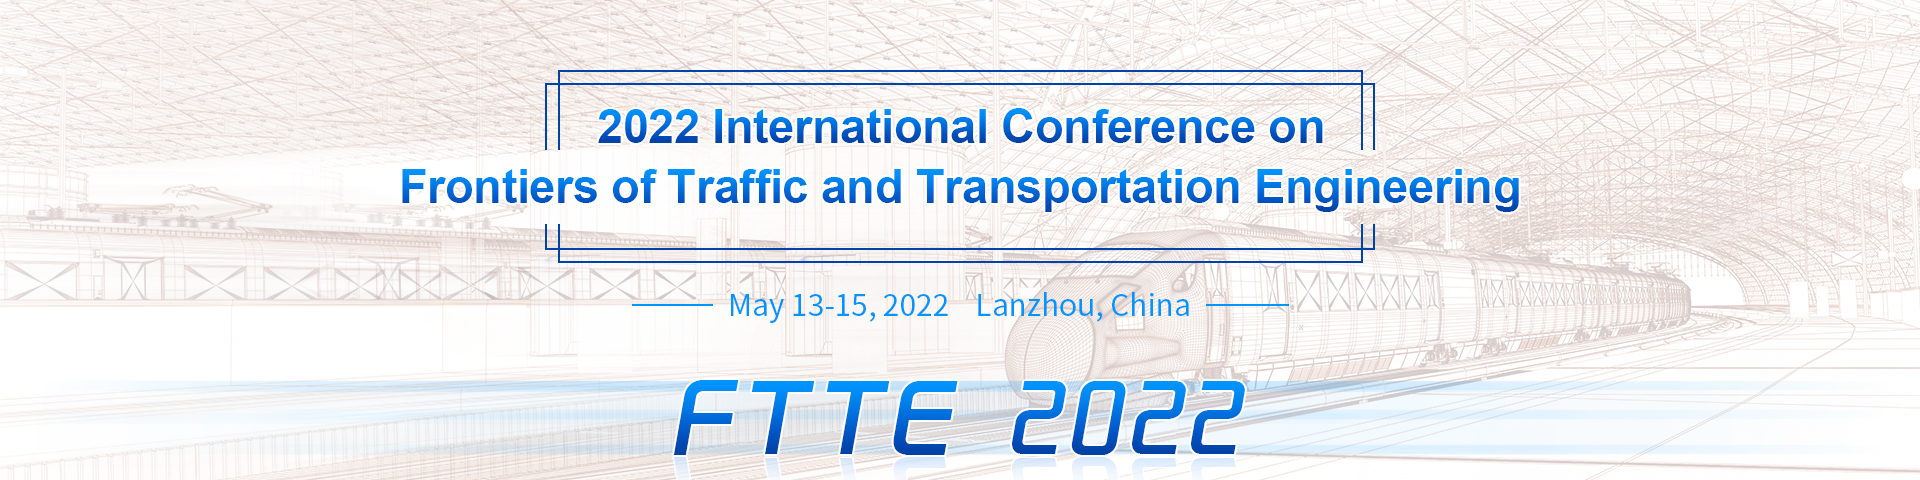 2022 International Conference on Frontiers of Traffic and Transportation Engineering（FTTE 2022）, Lanzhou, Gansu, China